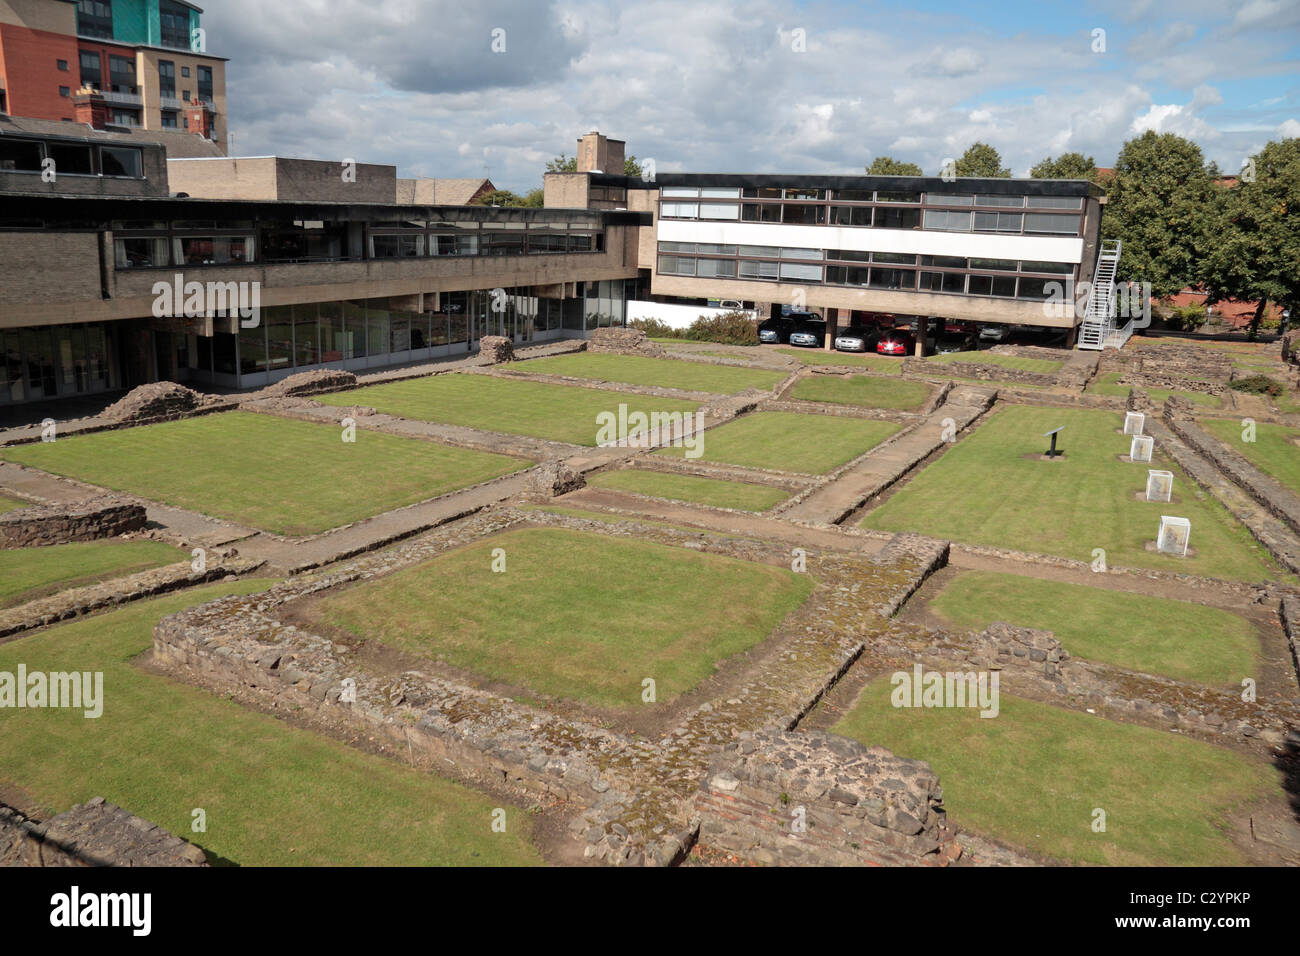 The Jewry Wall Museum and Roman Baths foundations in Leicester, Leicestershire, UK. (Jewry Wall off camera to right) Stock Photo